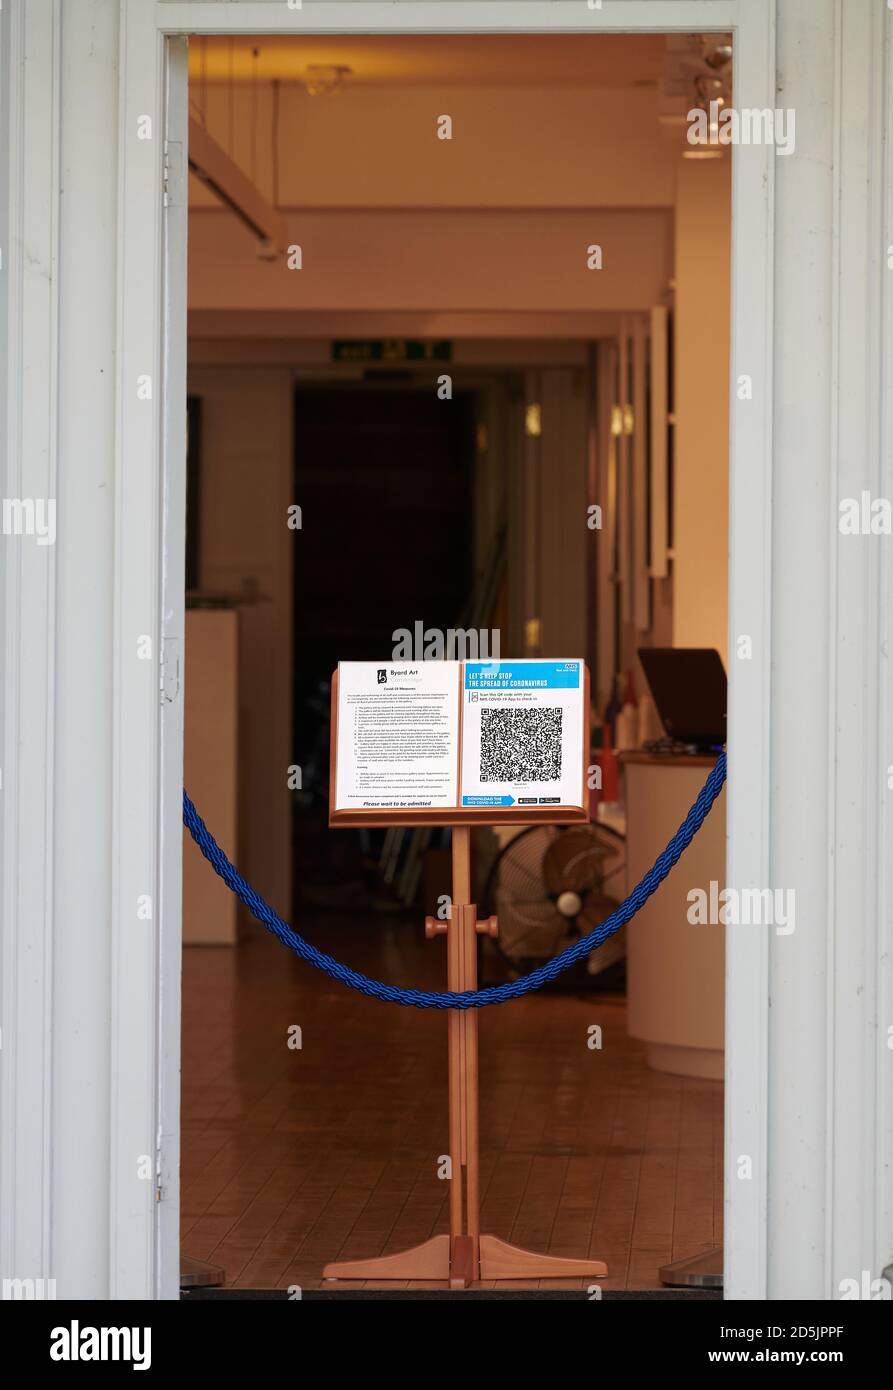 Protocols displayed on a lecturn at the entrance to the Byard art shop, Cambridge, England, during the coronavirus pandemic, October 2020. Stock Photo